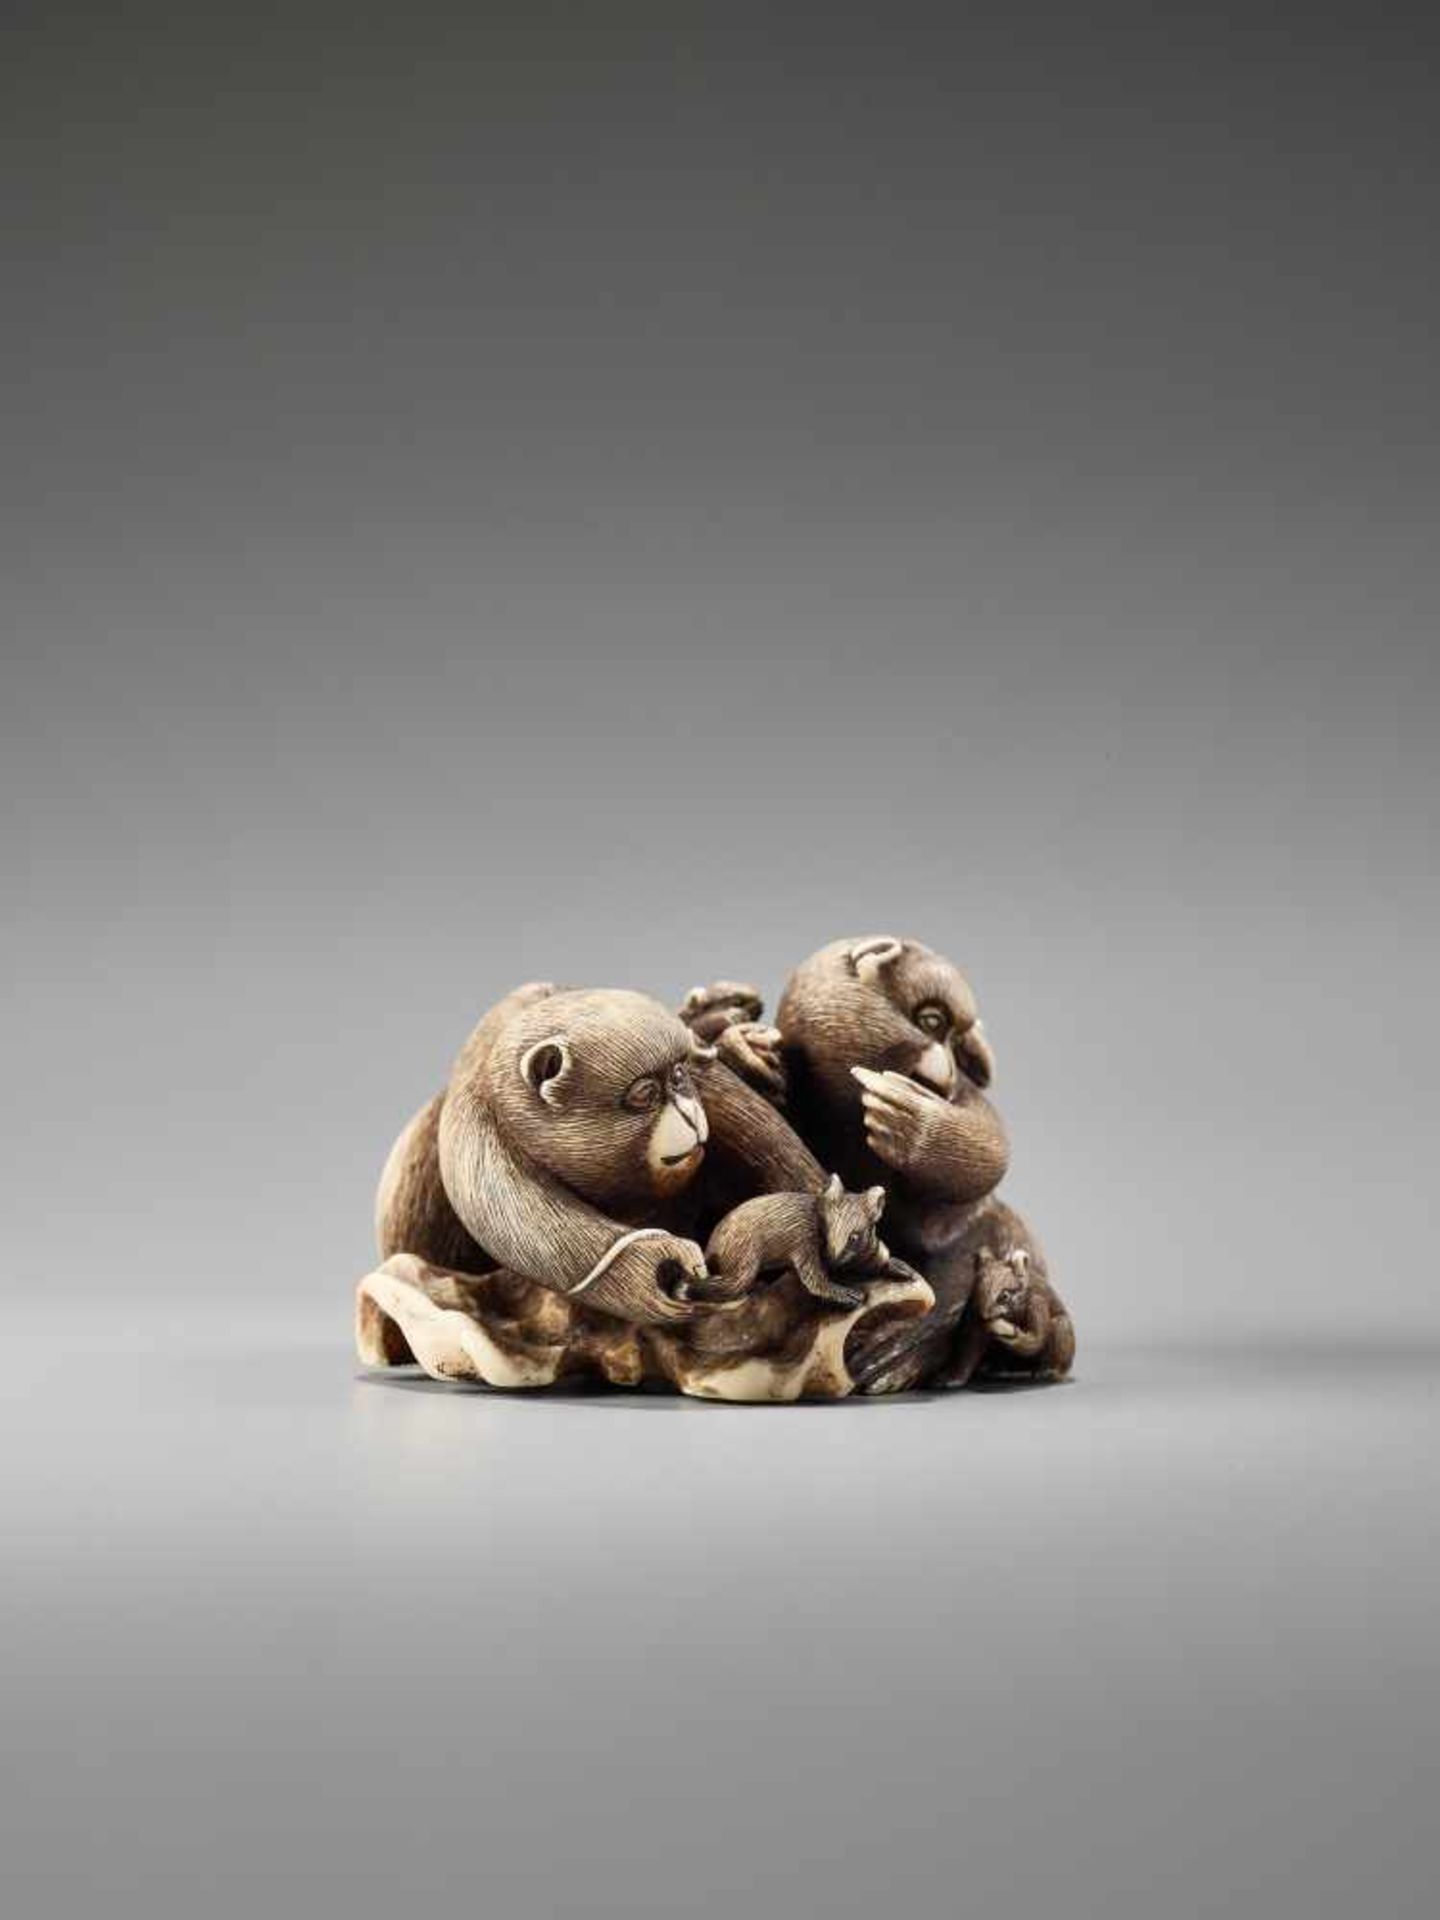 AN IVORY NETSUKE OF MONKEYS AND RATS BY GYOKUMINBy Gyokumin, ivory netsukeJapan, 19th century, Edo - Image 5 of 7